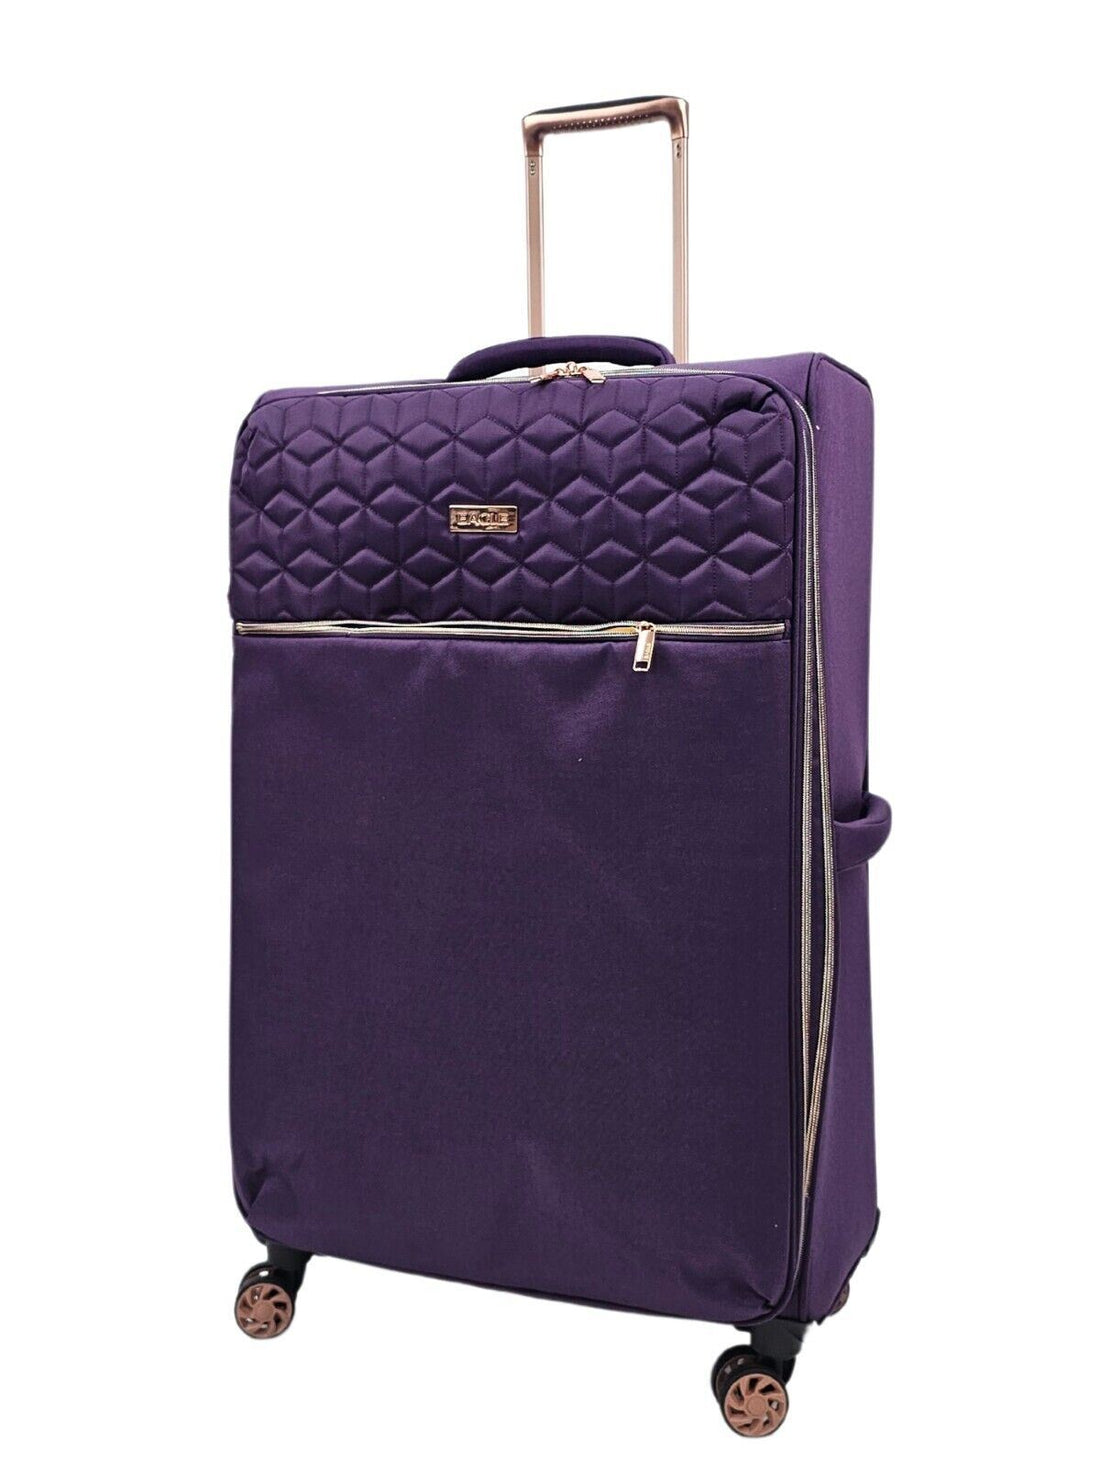 Cabin Purple Suitcases Set 4 Wheel Luggage Travel Lightweight Bags - Upperclass Fashions 